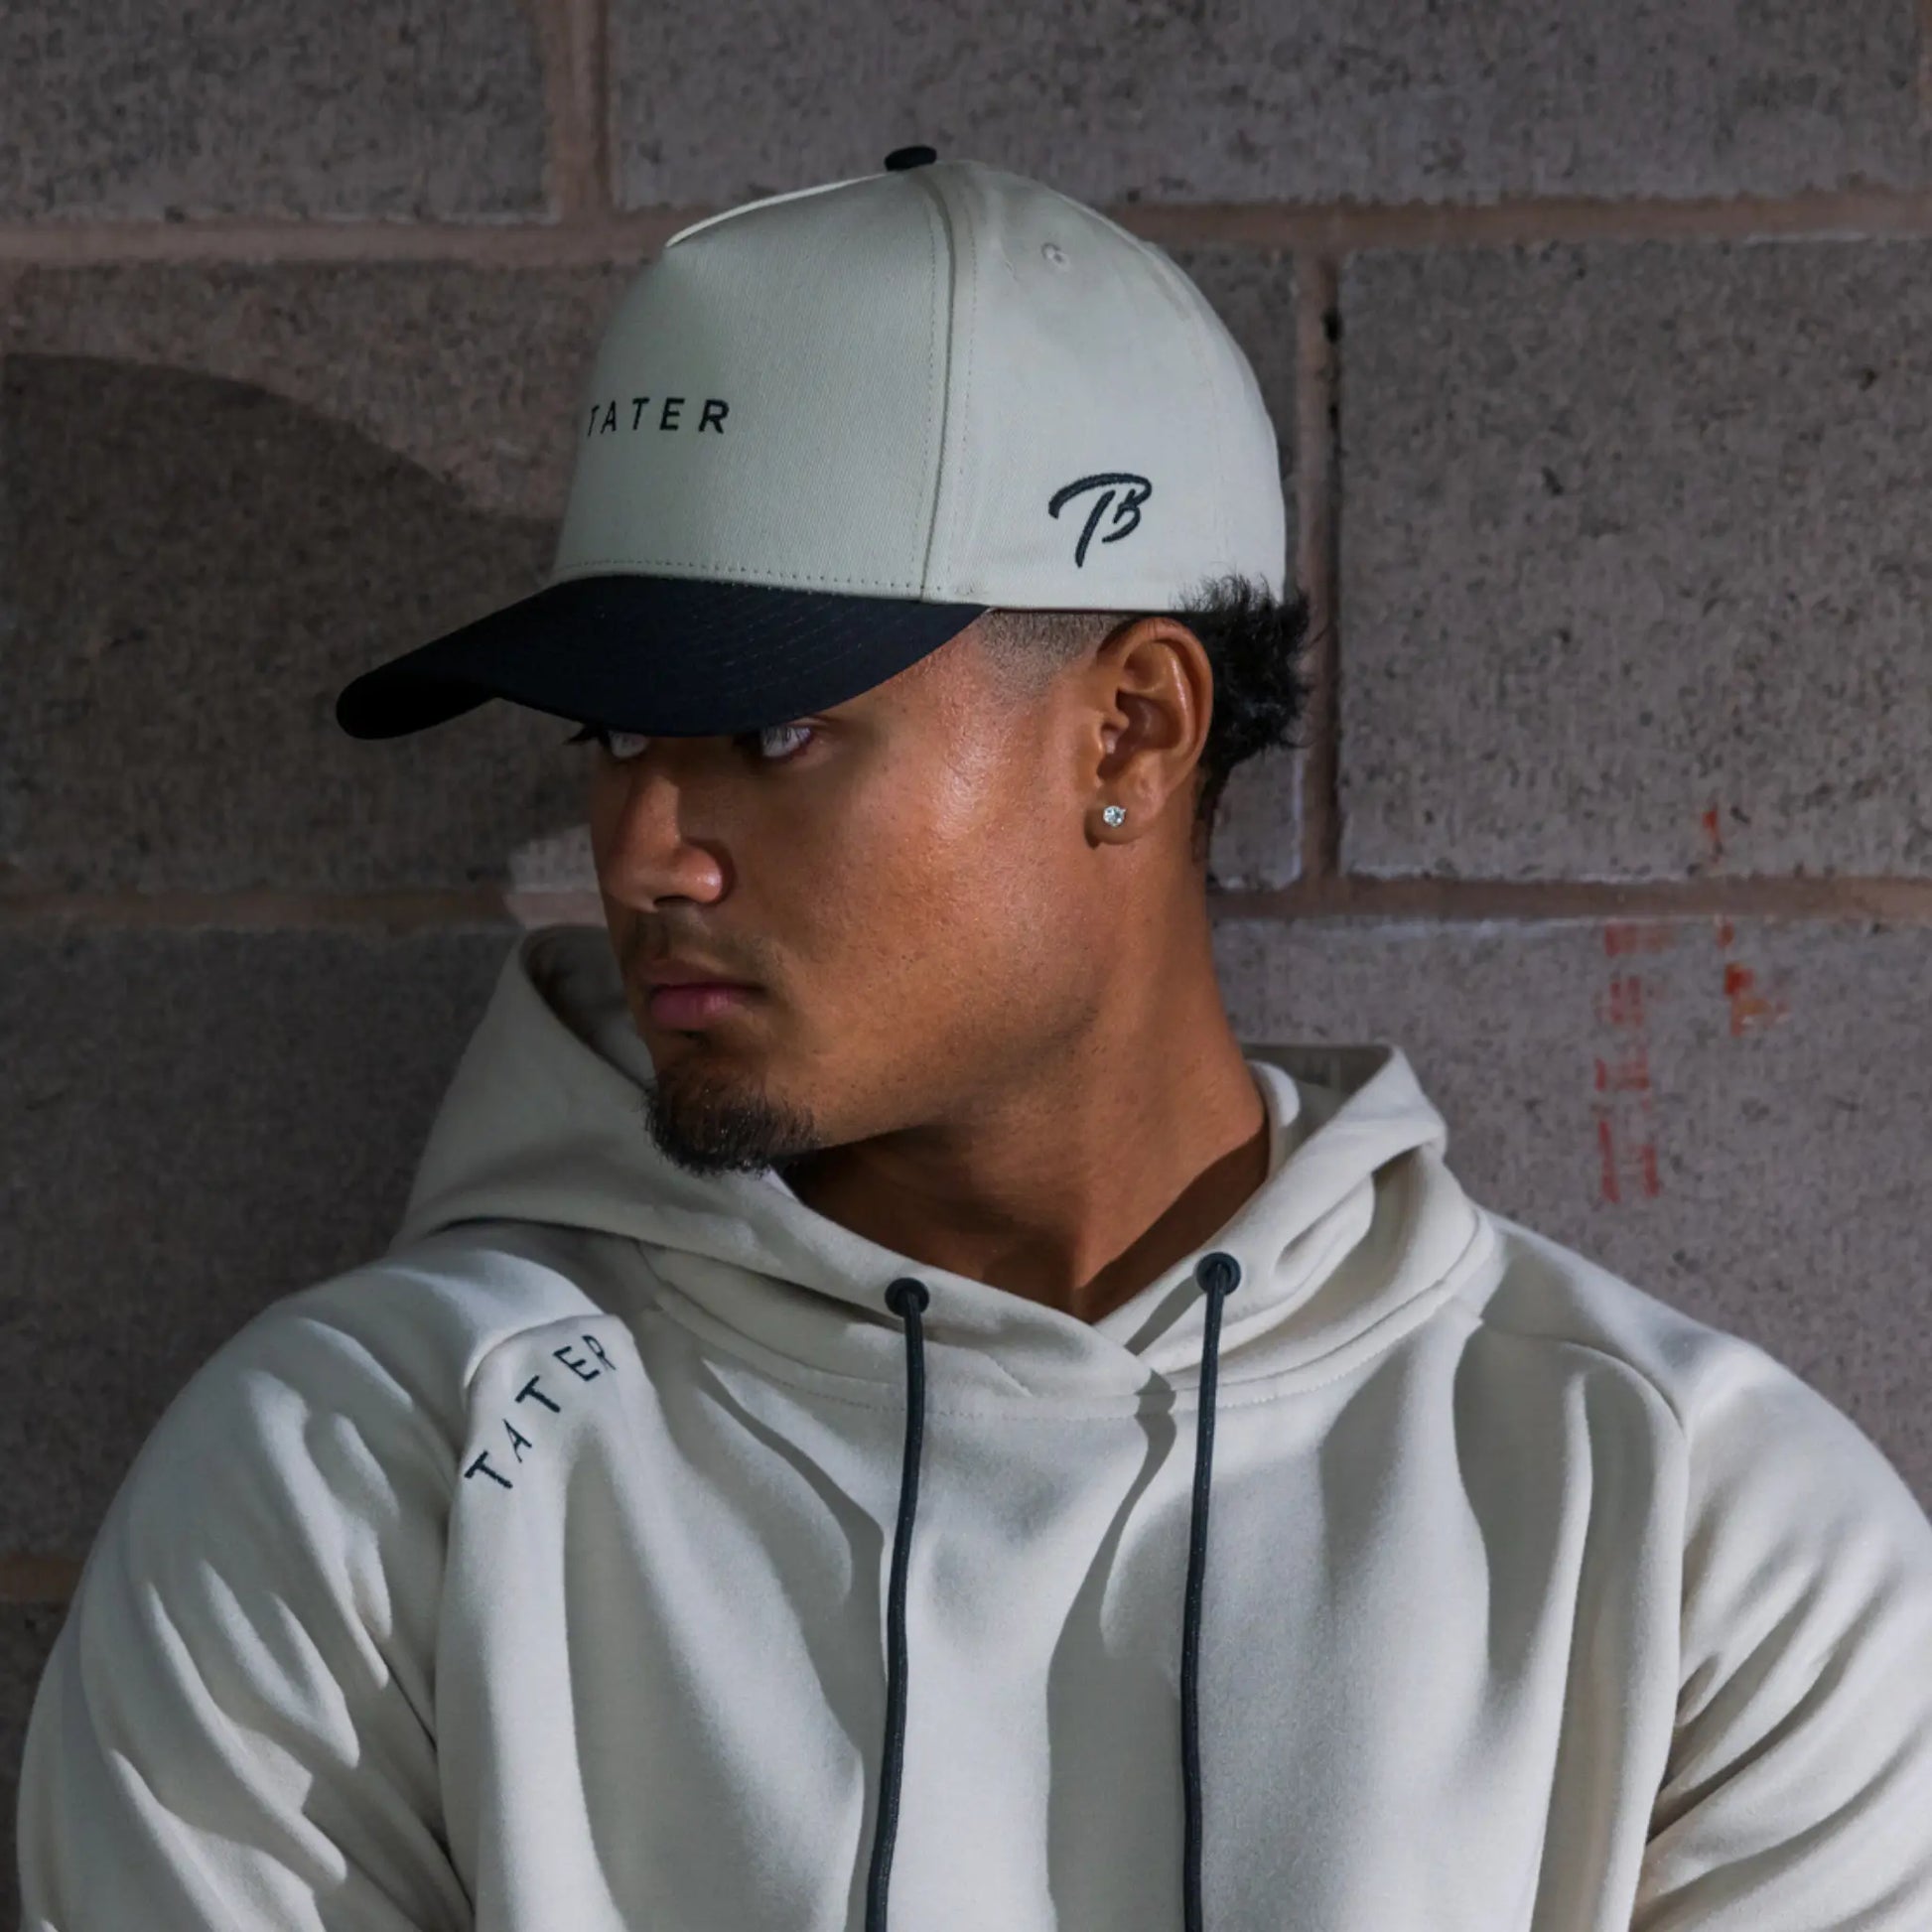 In this image, the subject is wearing a cream-colored snapback hat with the "Tater" logo in black, which matches the hoodie's color and branding. The hat's bill is black, creating a stylish contrast. The person's sideways glance adds a contemplative or focused ambiance to the photo. The lighting accentuates the textures and colors of the apparel, and the background's muted tones allow the Tater Baseball brand elements to stand out, emphasizing a fusion of casual style and athletic wear.